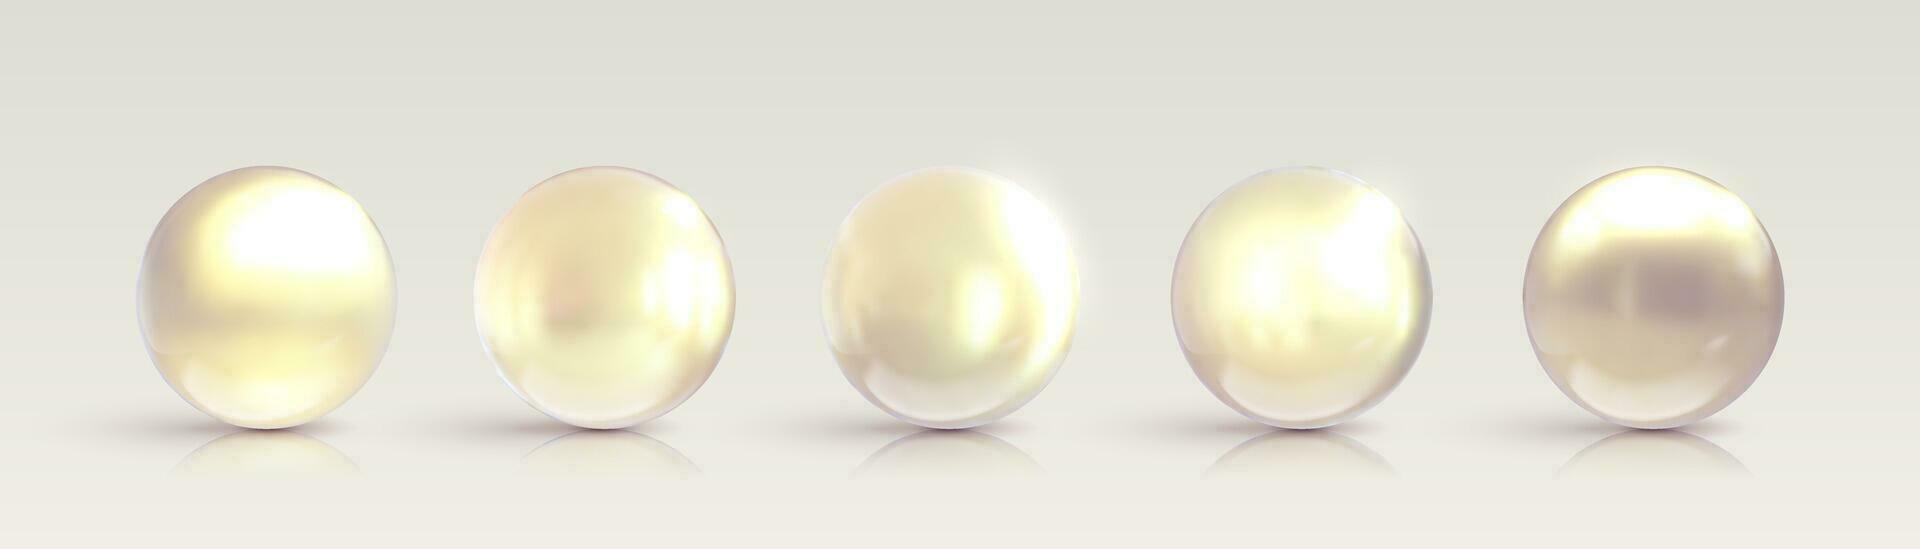 Set of pearl 3d spheres ball with reflection realistic style. Pearl glossy beads isolated on white background. 3d elements for design. Vector illustration